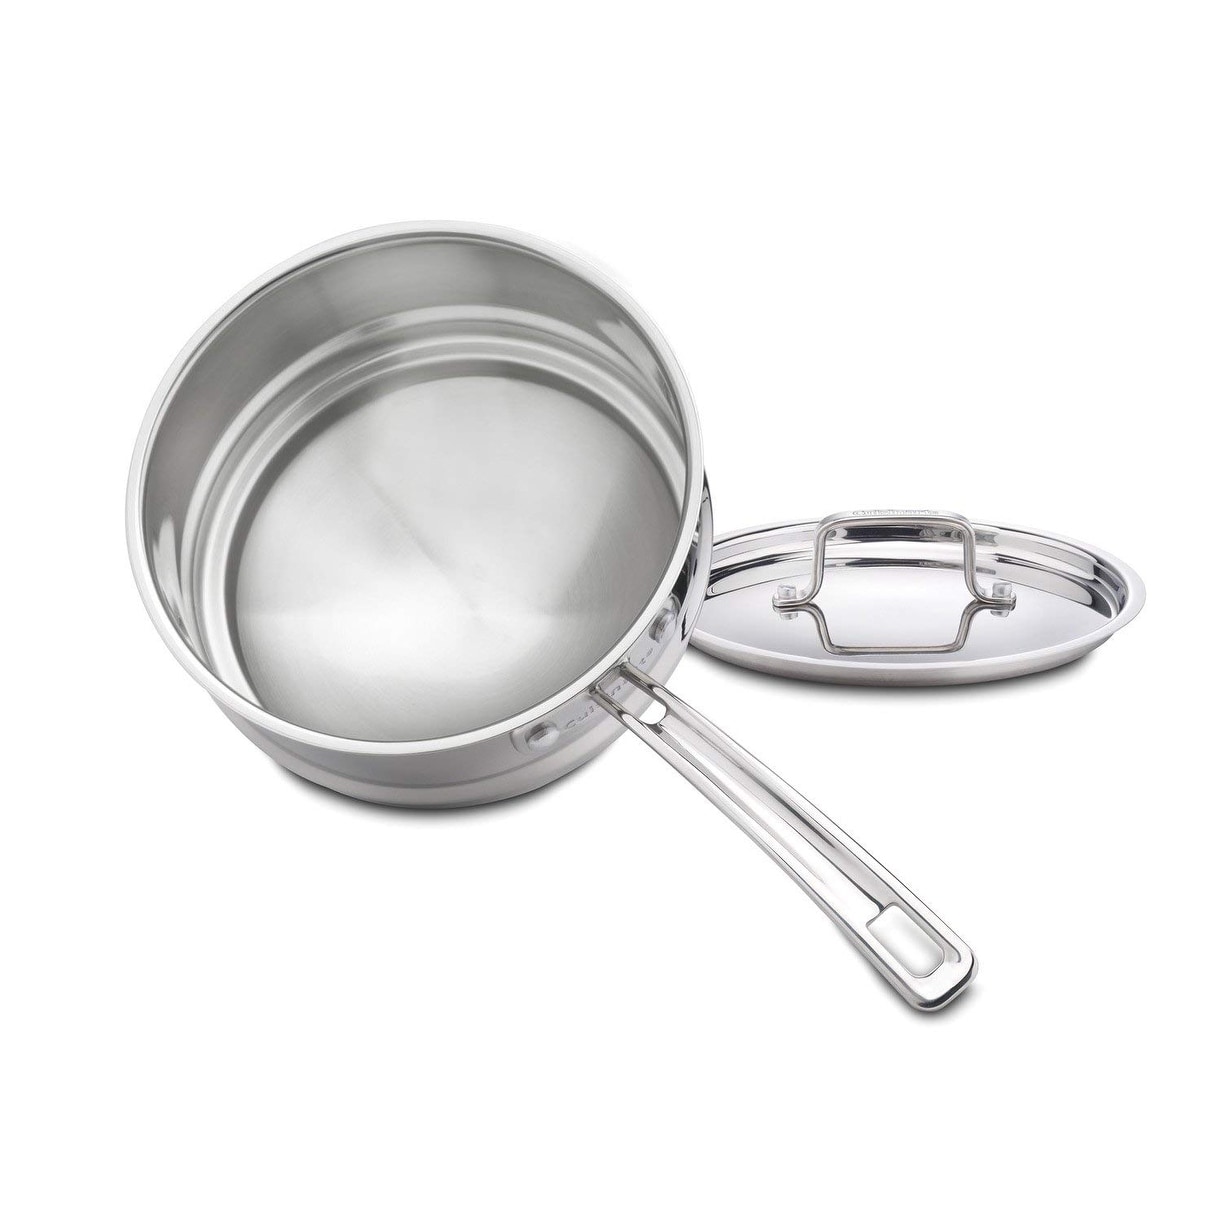 https://ak1.ostkcdn.com/images/products/is/images/direct/5e3af35ca95e87389446d21cadbb3f3ceb2dde6e/Cuisinart-MCP111-20N-MultiClad-Pro-Stainless-Universal-Double-Boiler-with-Cover.jpg